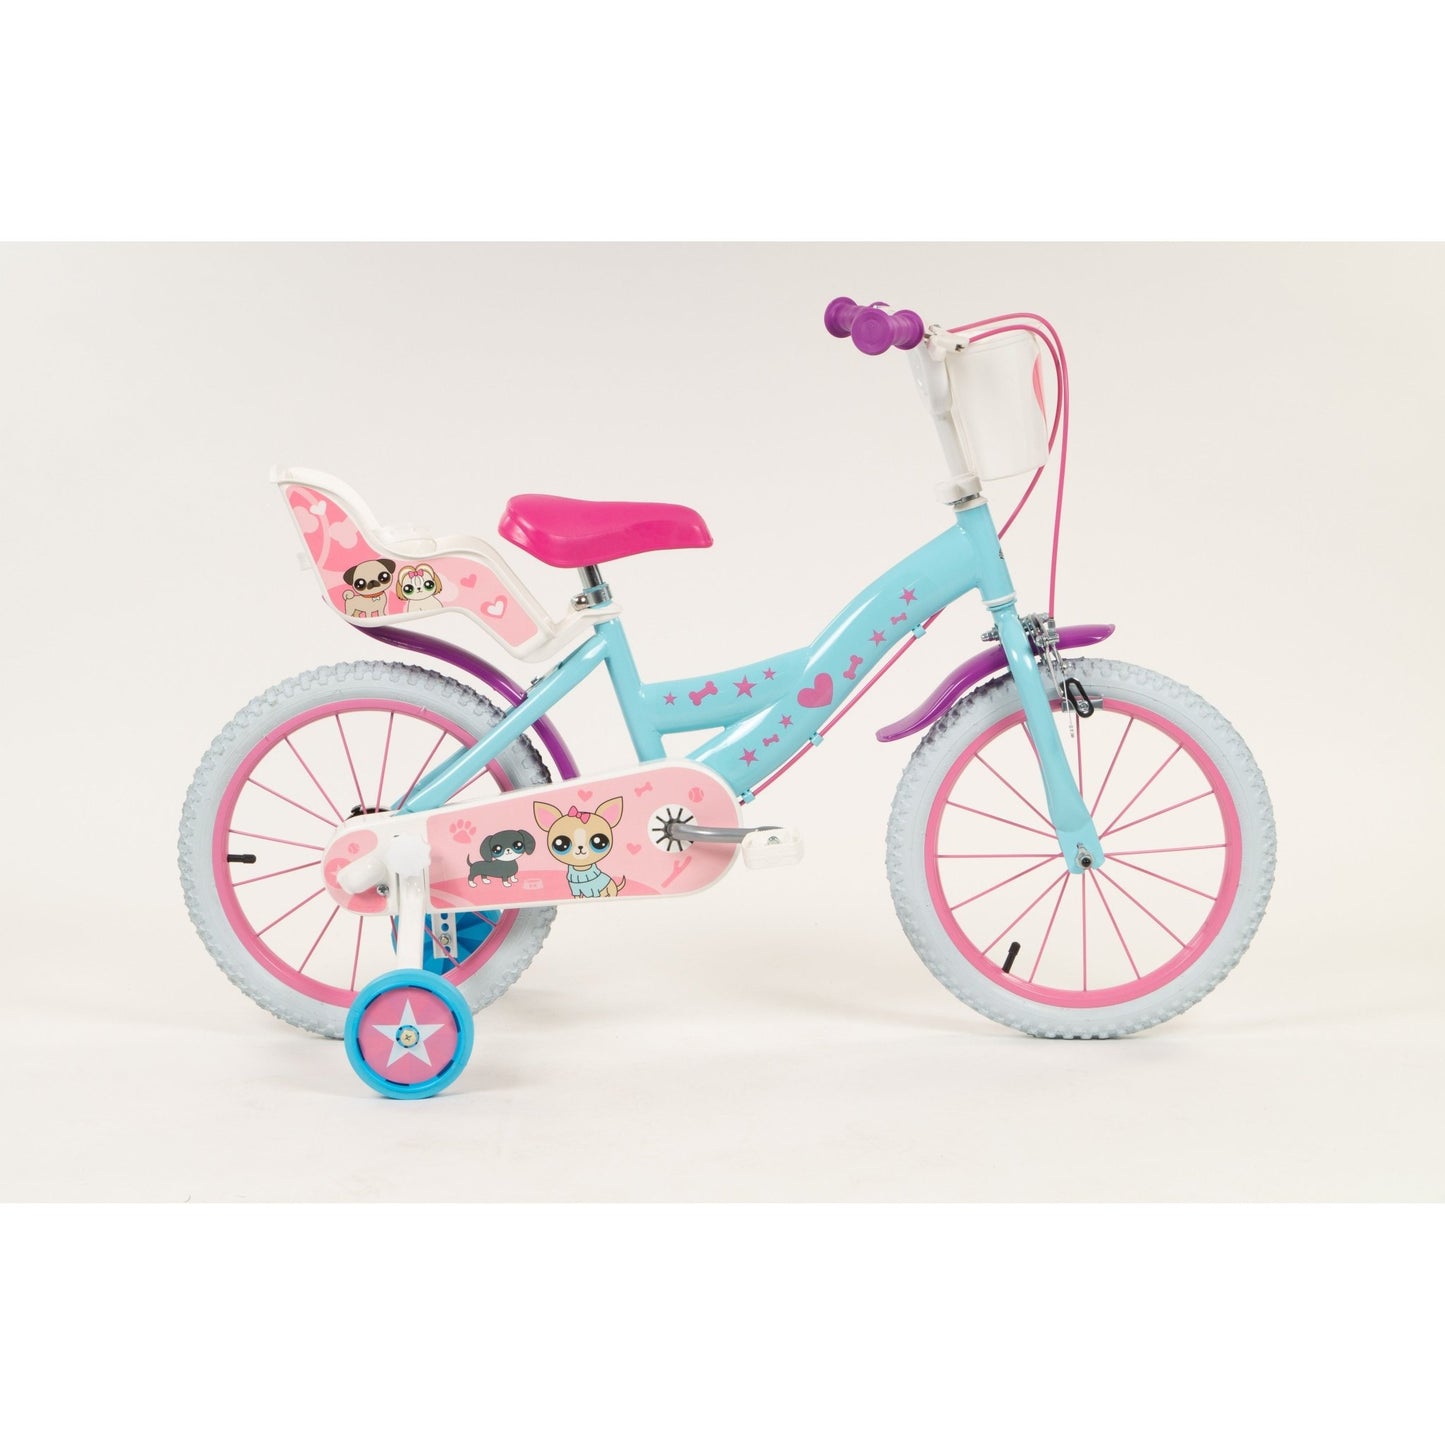 Pets Childrens Bicycle - Available in 3 Sizes - The Online Toy Shop - Bicycle - 16